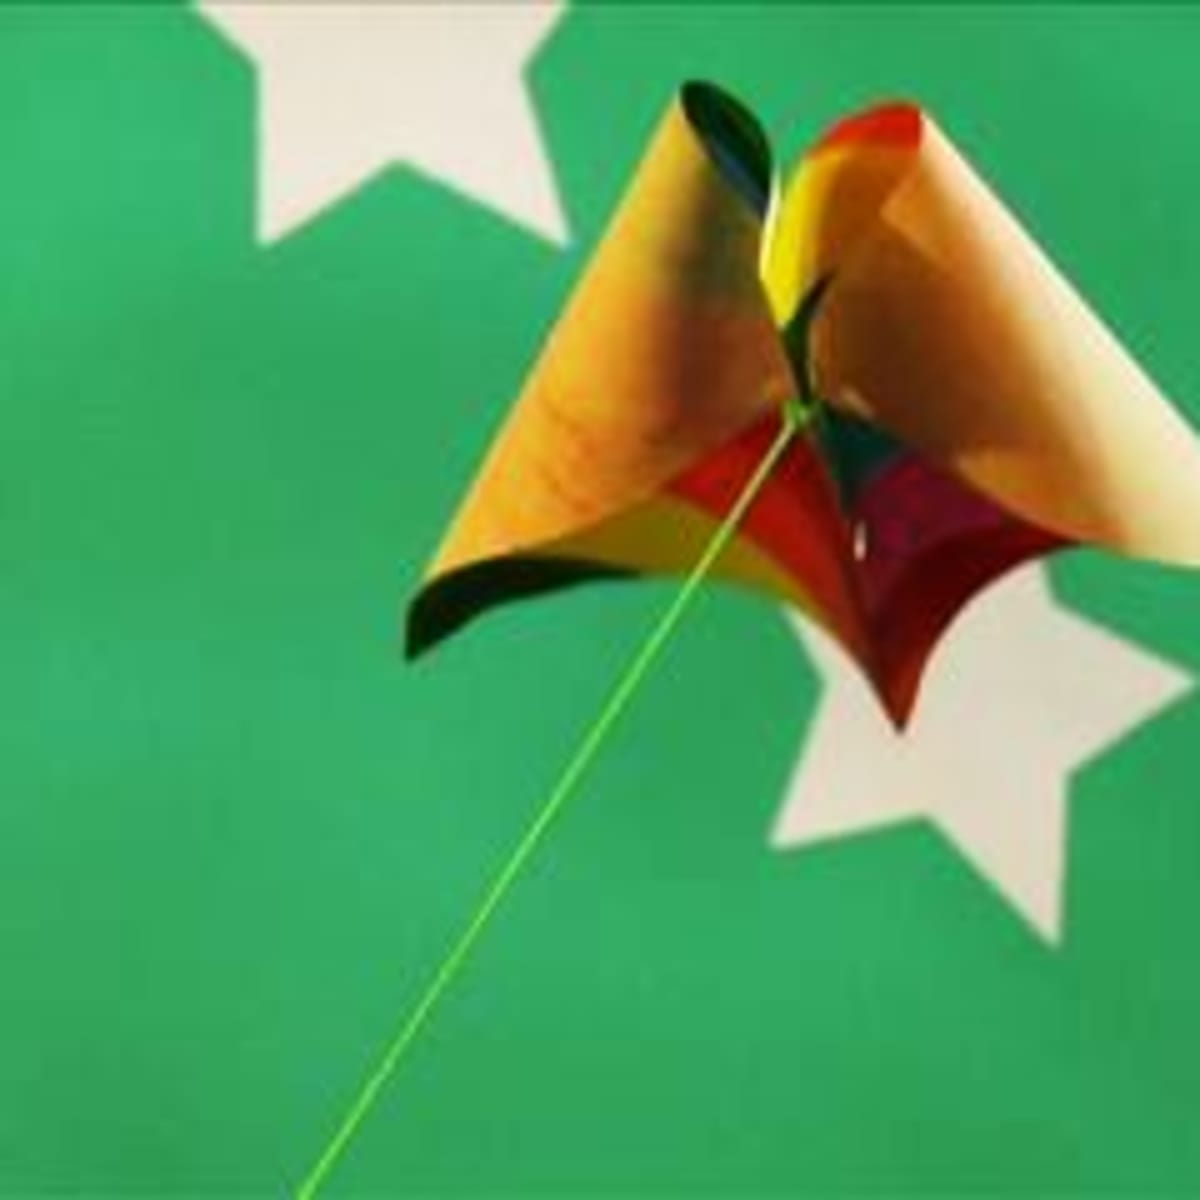 How to Make a Simple Paper Kite - Howcast